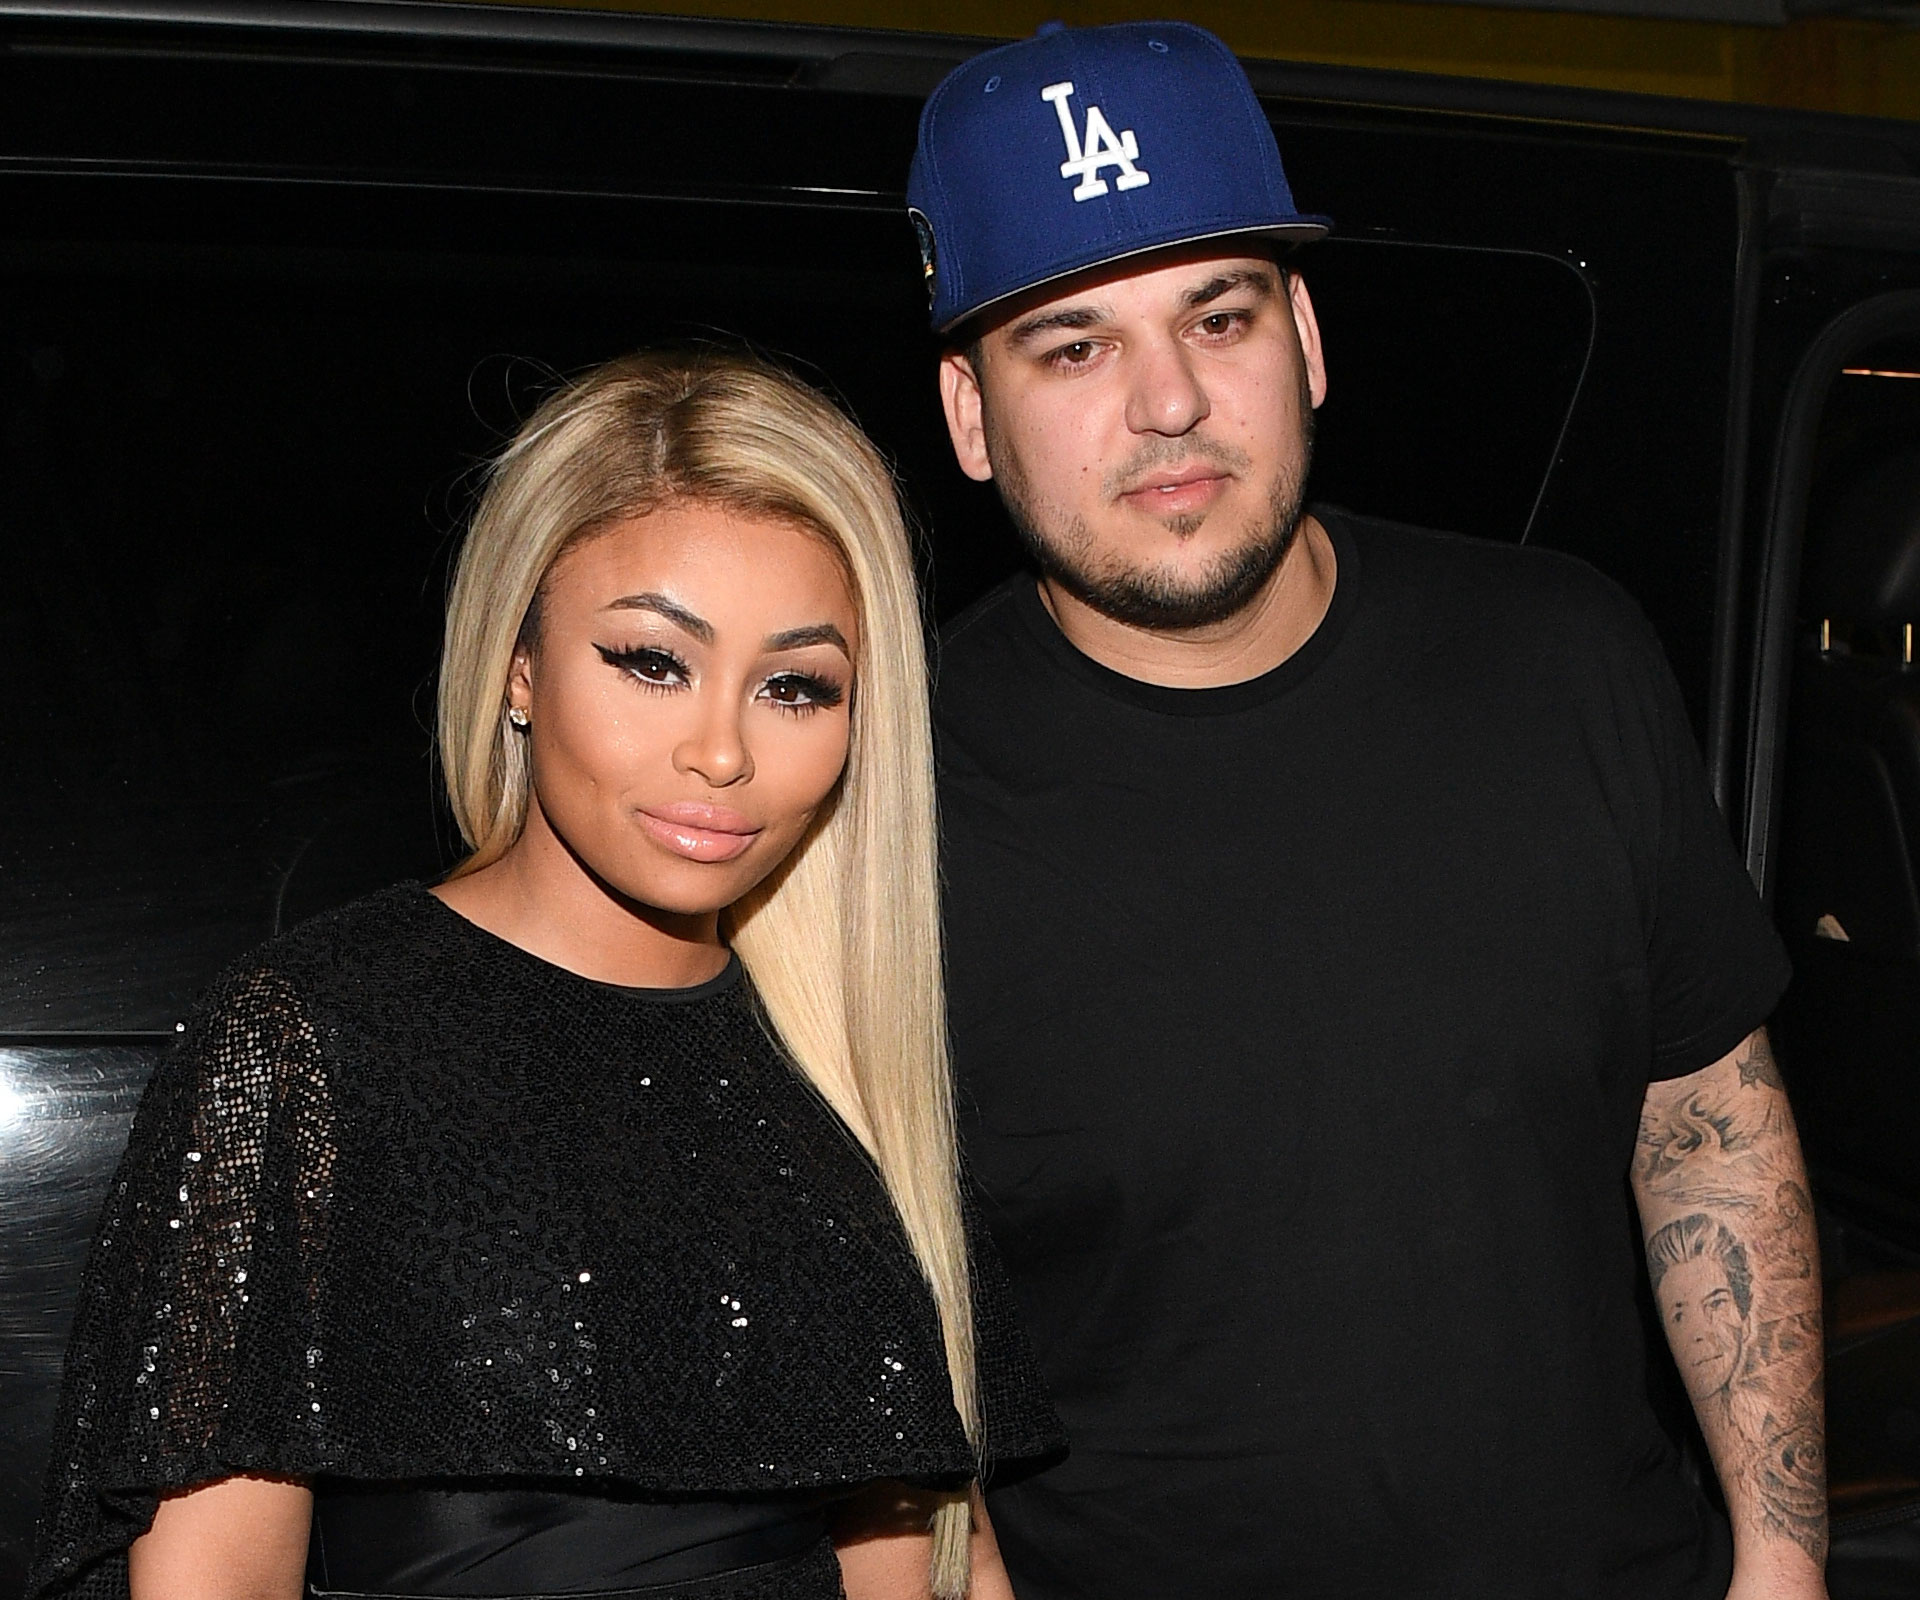 Rob Kardashian gets unborn baby’s name tattooed on his neck